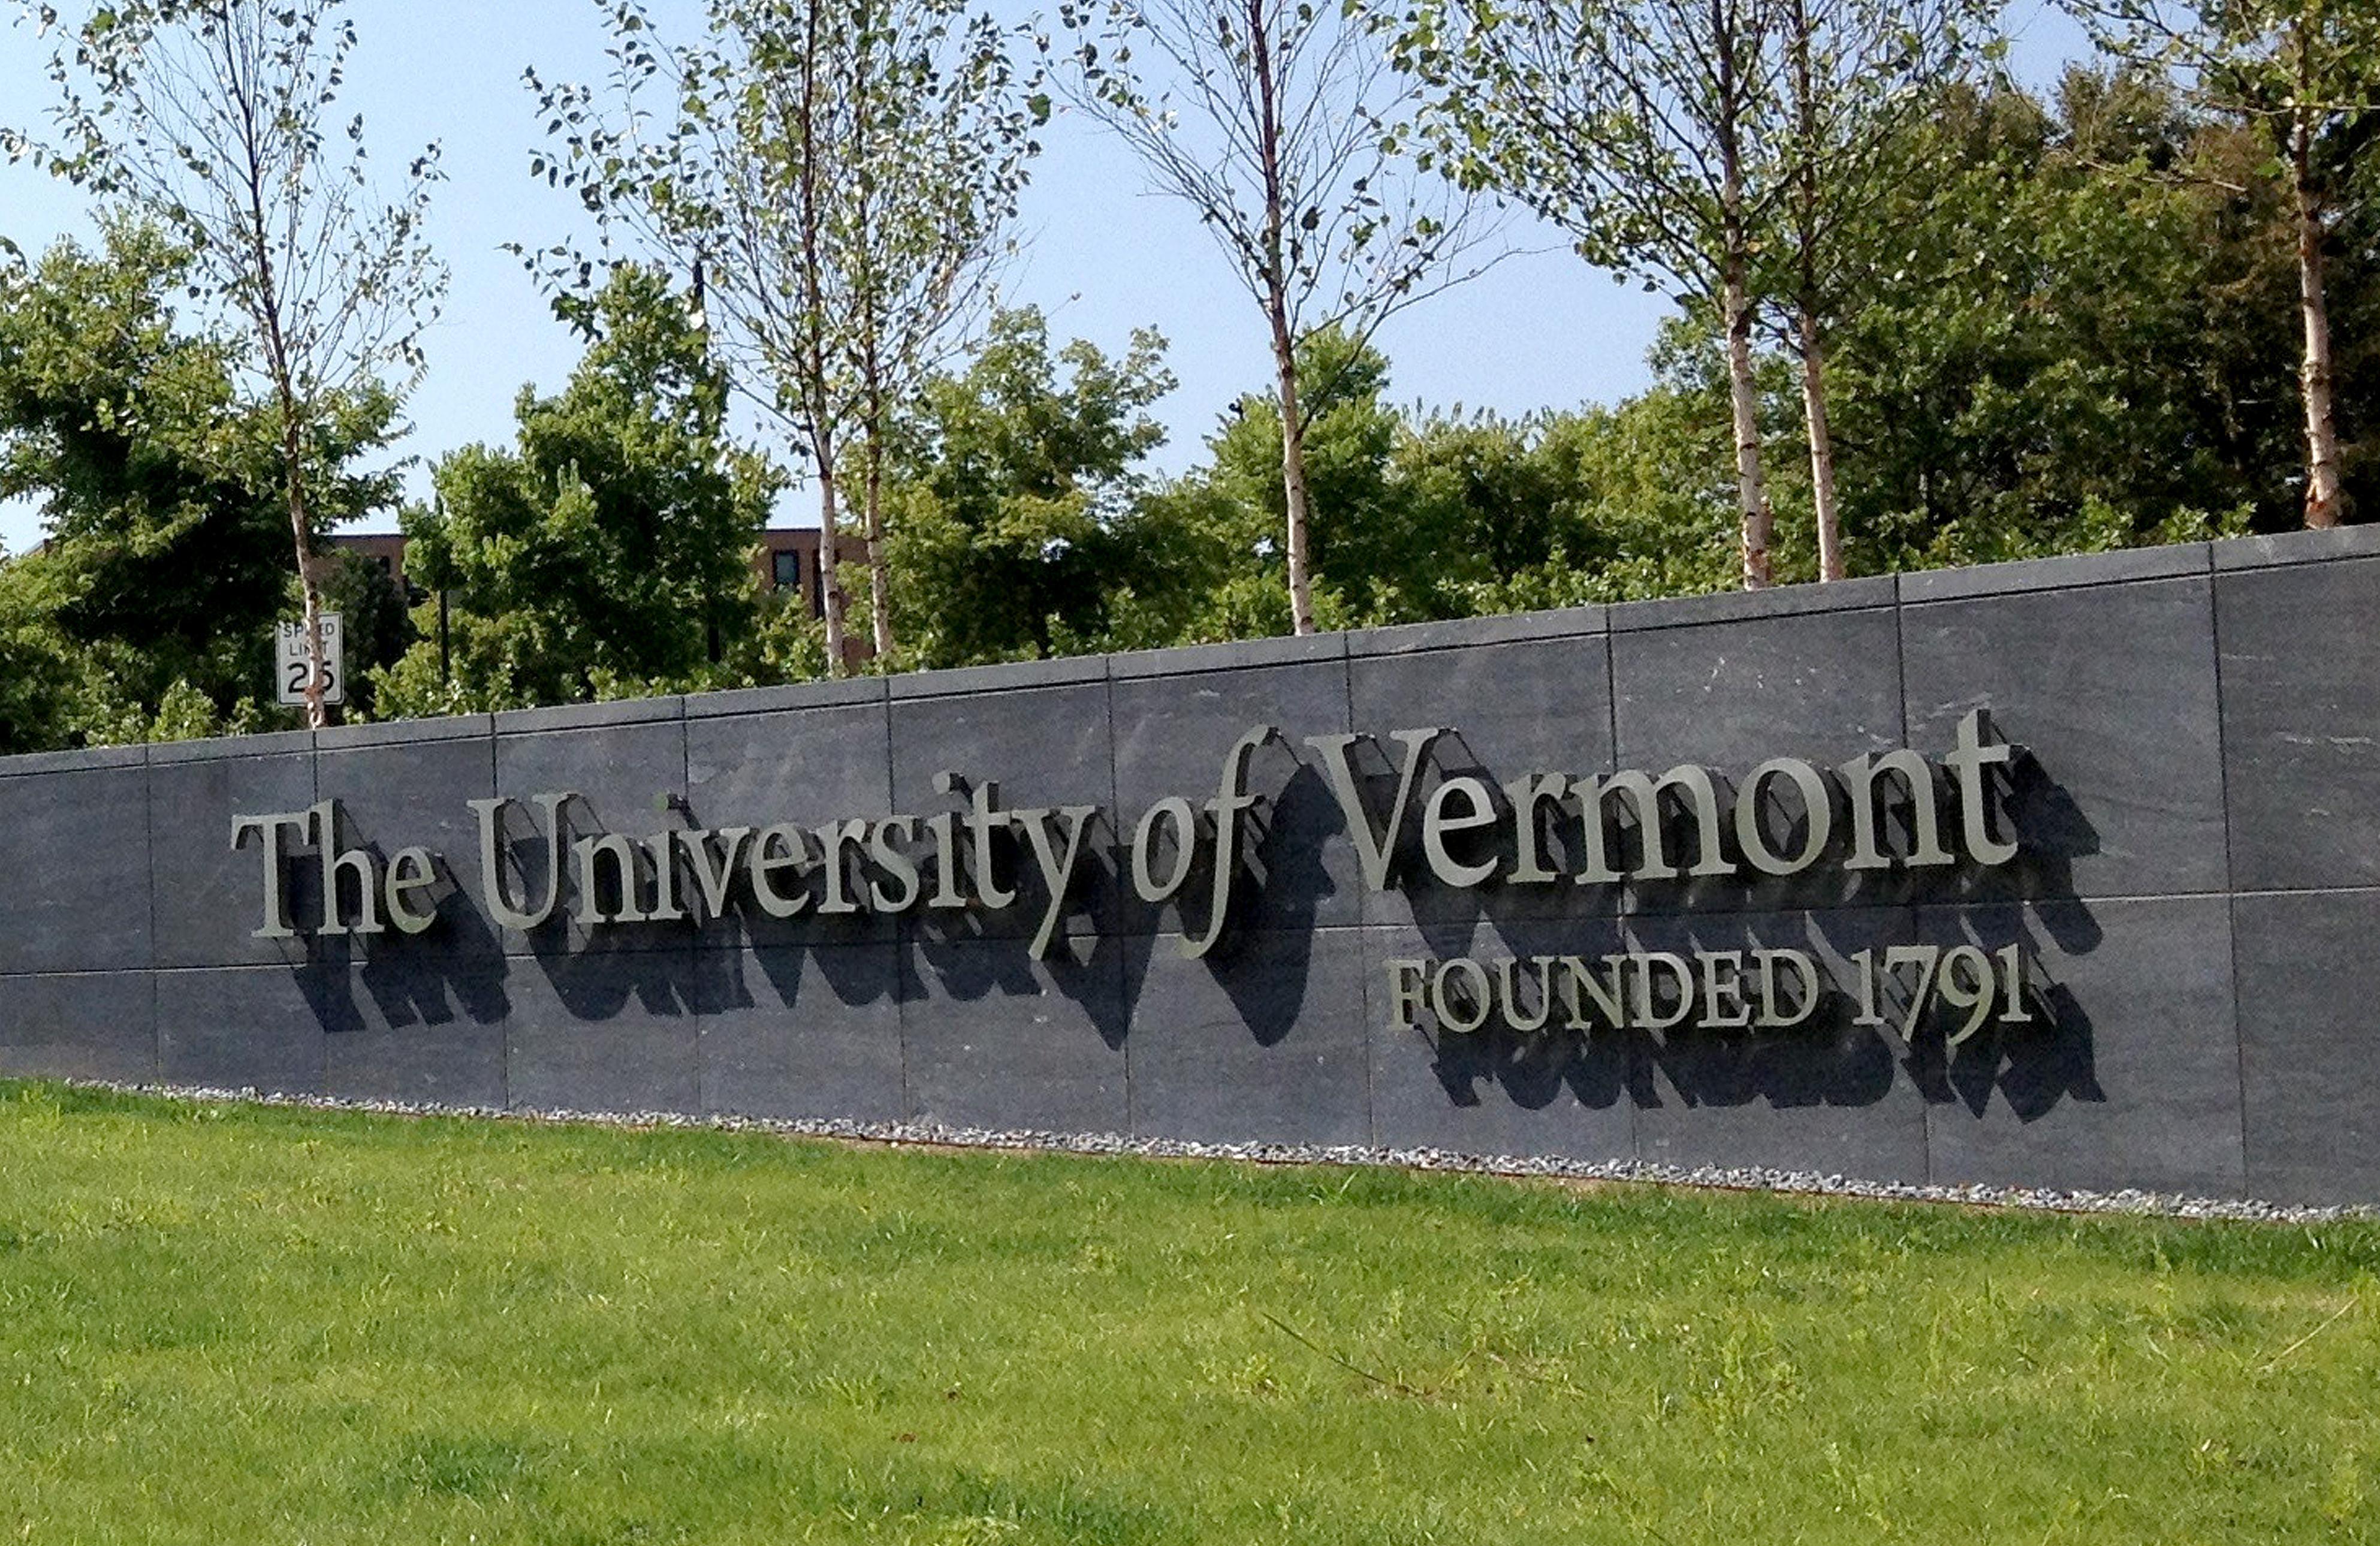 Jury rules in favor of University of Vermont in gender discrimination lawsuit by former employee